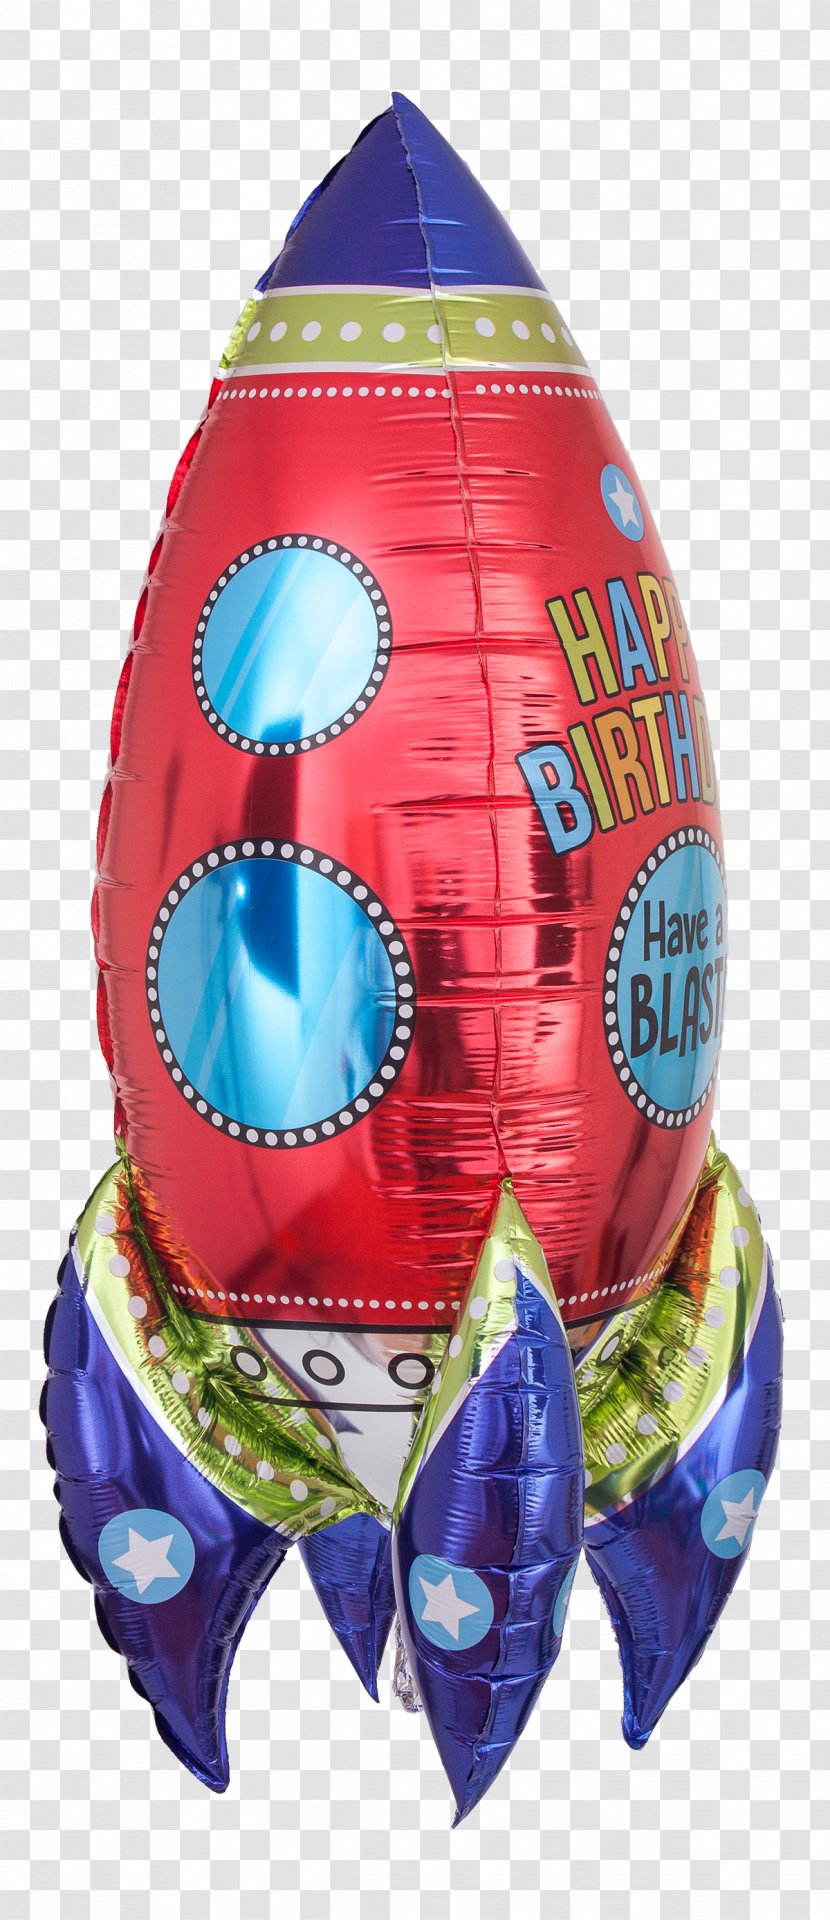 Toy Balloon Rocket Birthday - Germany Transparent PNG